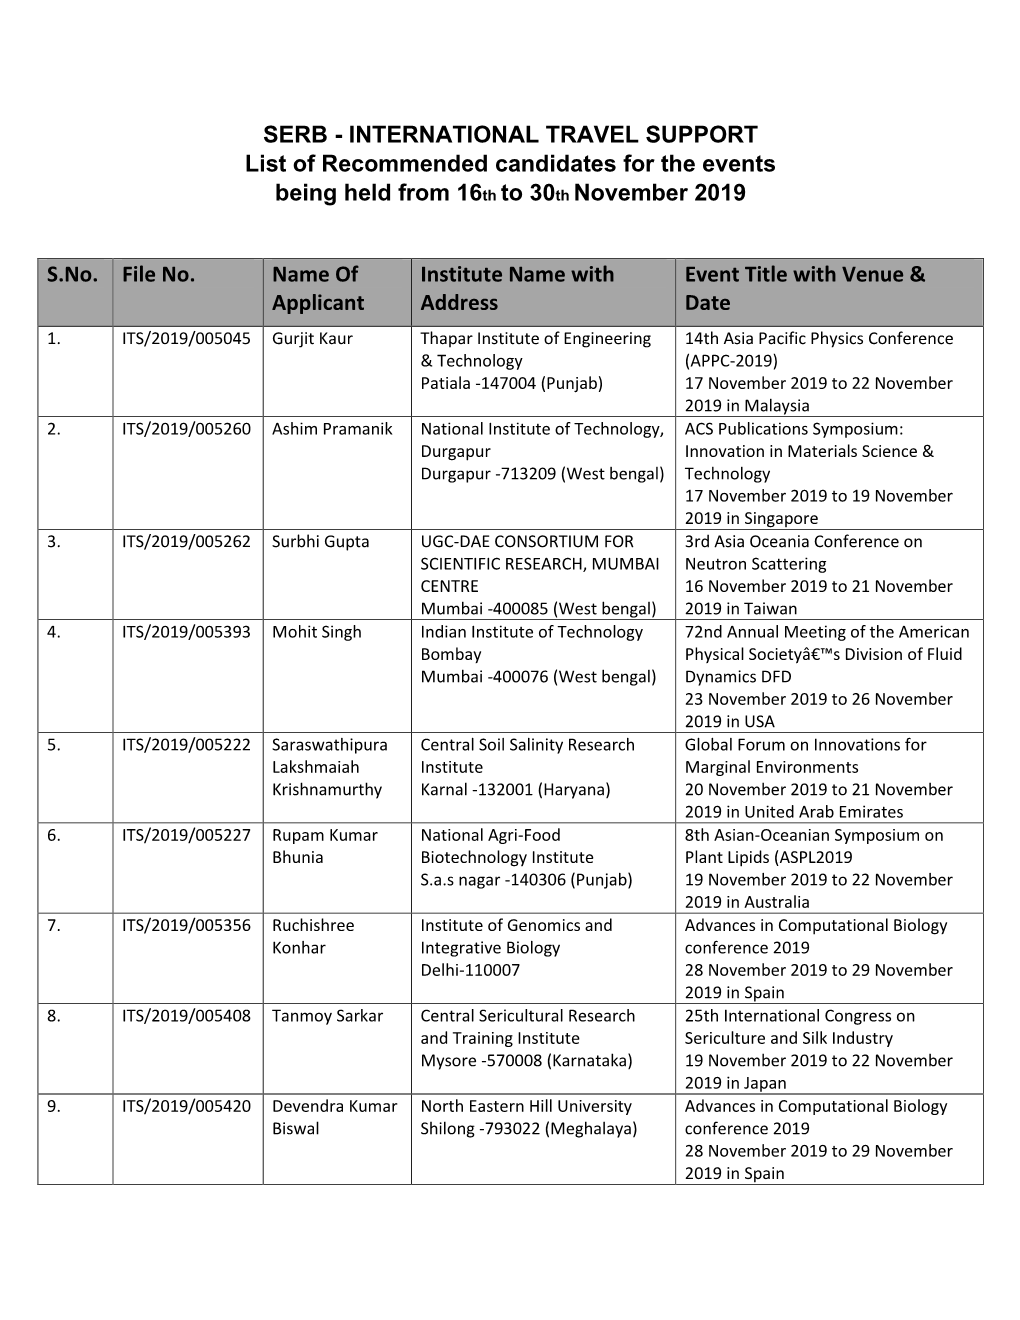 INTERNATIONAL TRAVEL SUPPORT List of Recommended Candidates for the Events Being Held from 16Th to 30Th November 2019